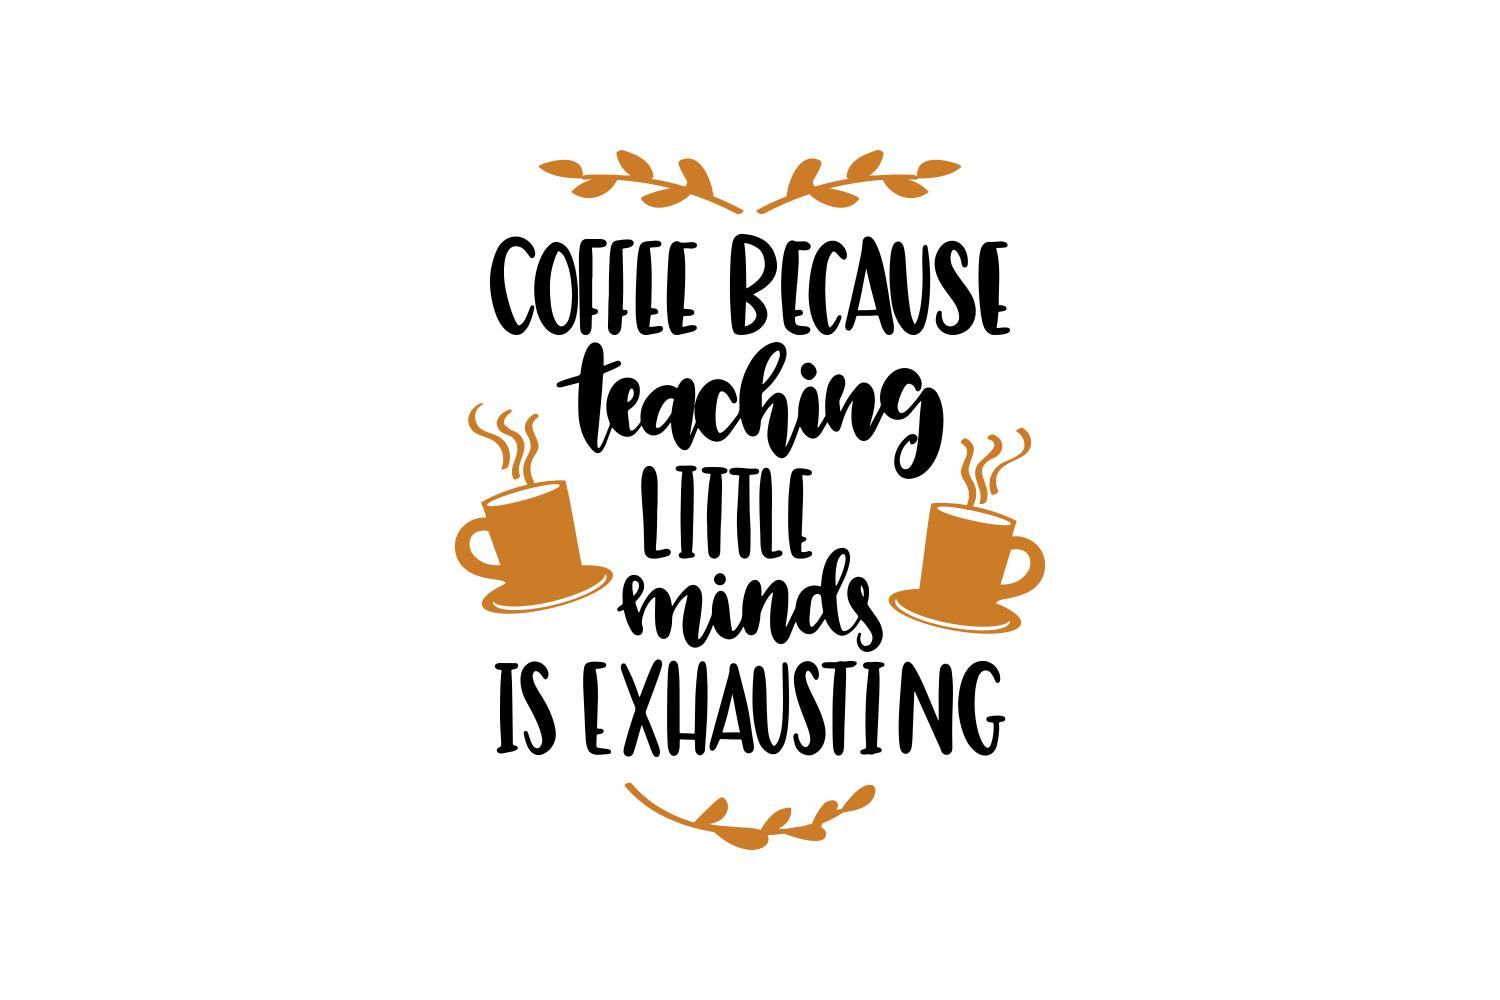 Coffee Because Teaching Little Minds is Exhausting